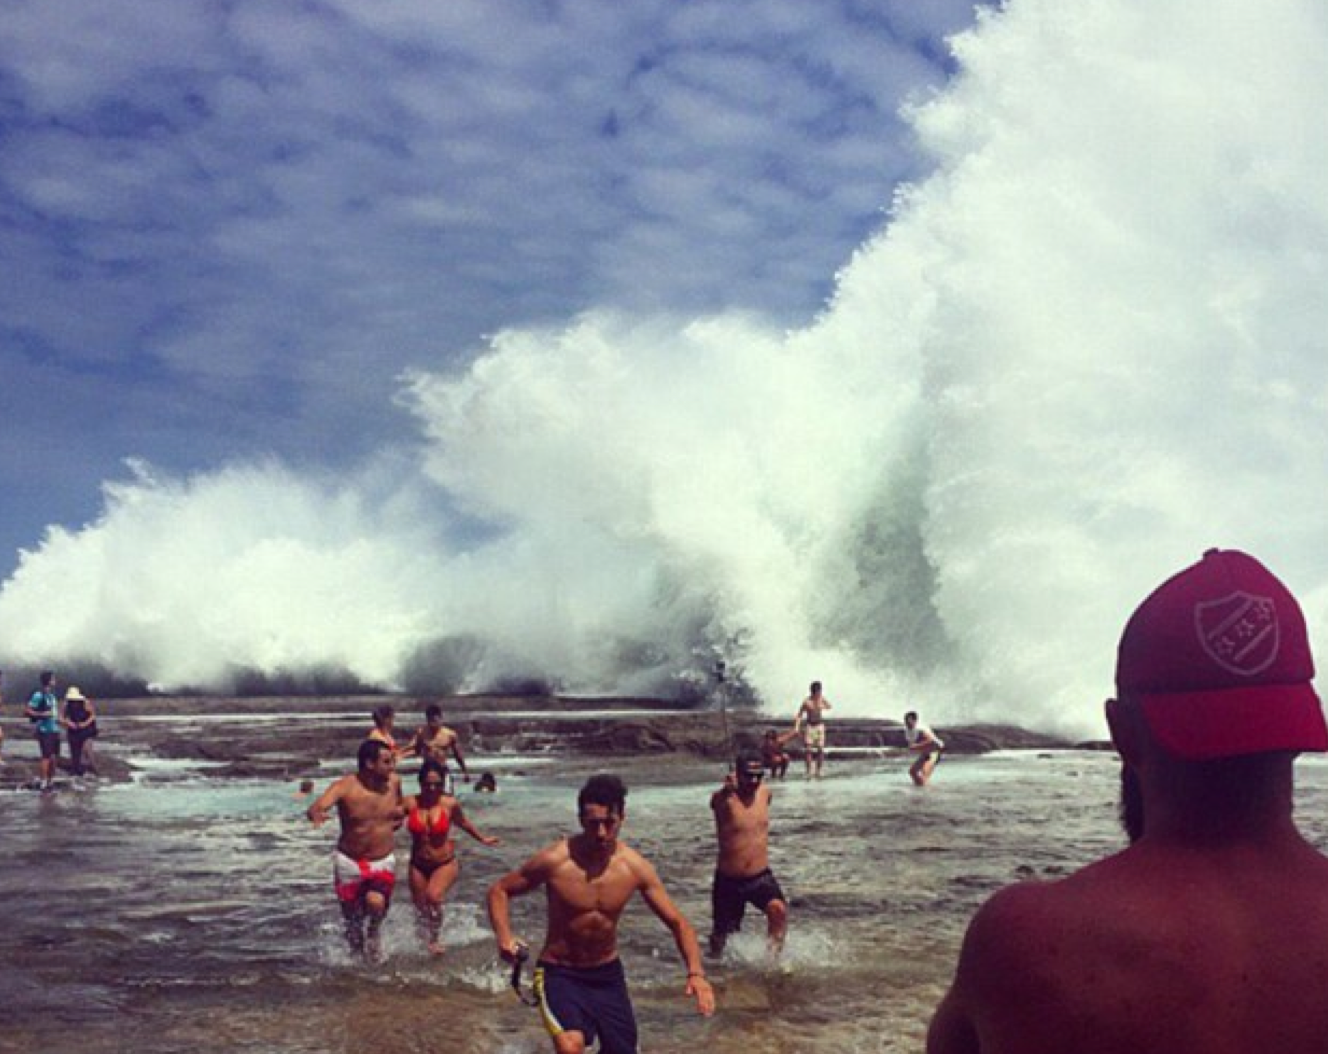 giant rogue wave sydney, giant wave sydney, monster wave sydney, monster rogue wave sydney injures people, monster wave sydney january 9 2016, monster wave sydney january 9 2016 video, video monster wave wipes out people in sydney